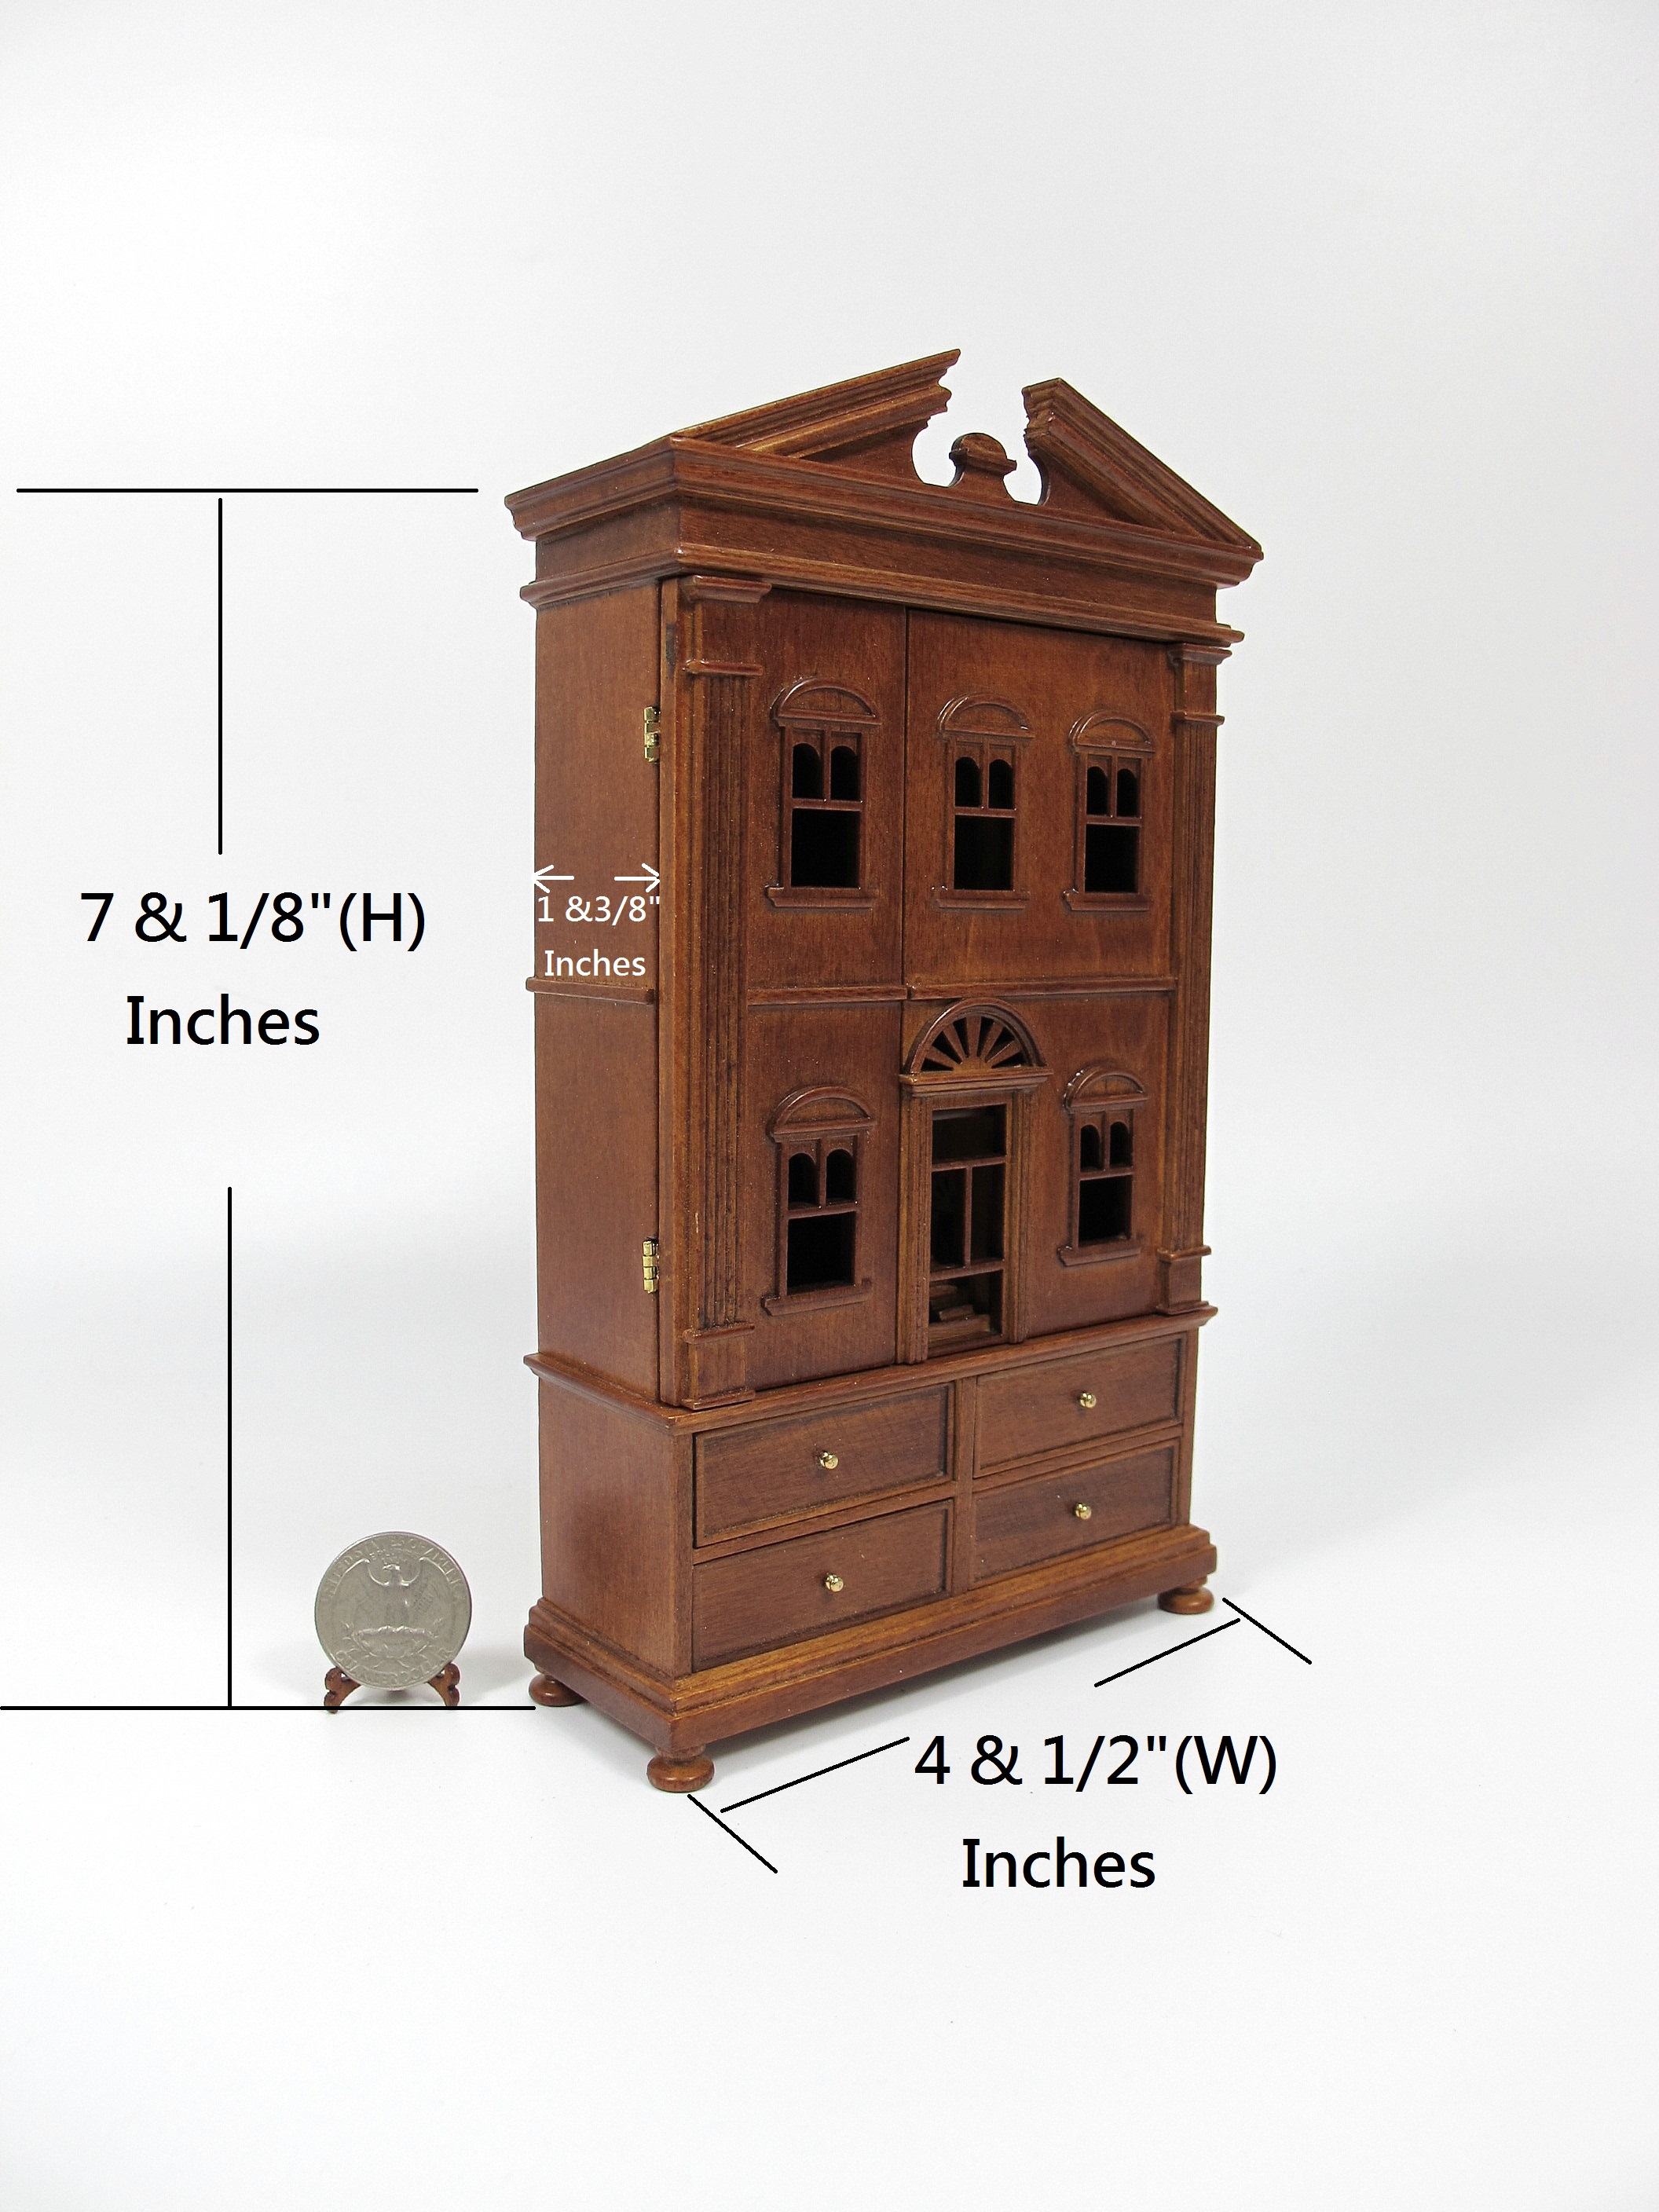 Miniature Wooden The "Barbara" Baby House[Finished in walnut]